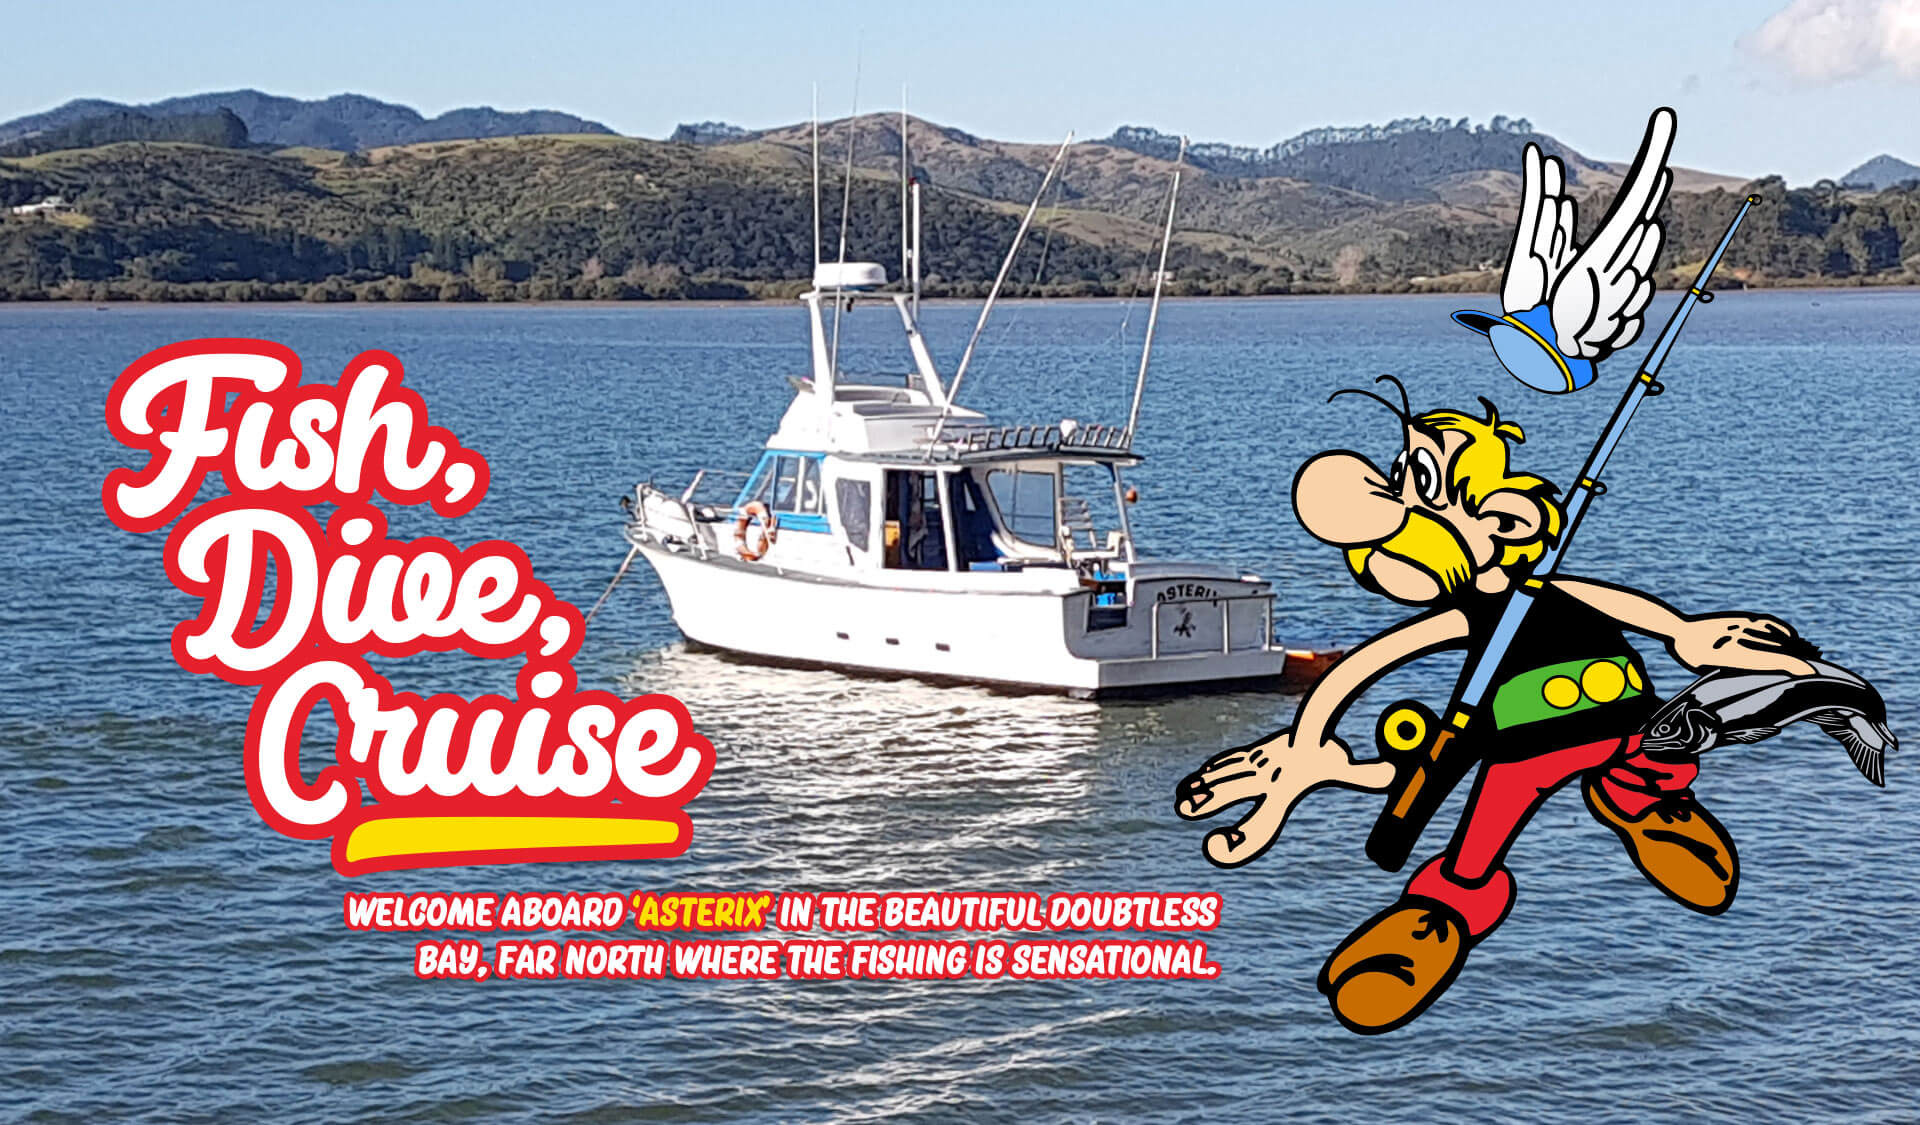 Doubtless Bay Charters, Fishing Charter in Doubtless Bay, Far North, Northland. 